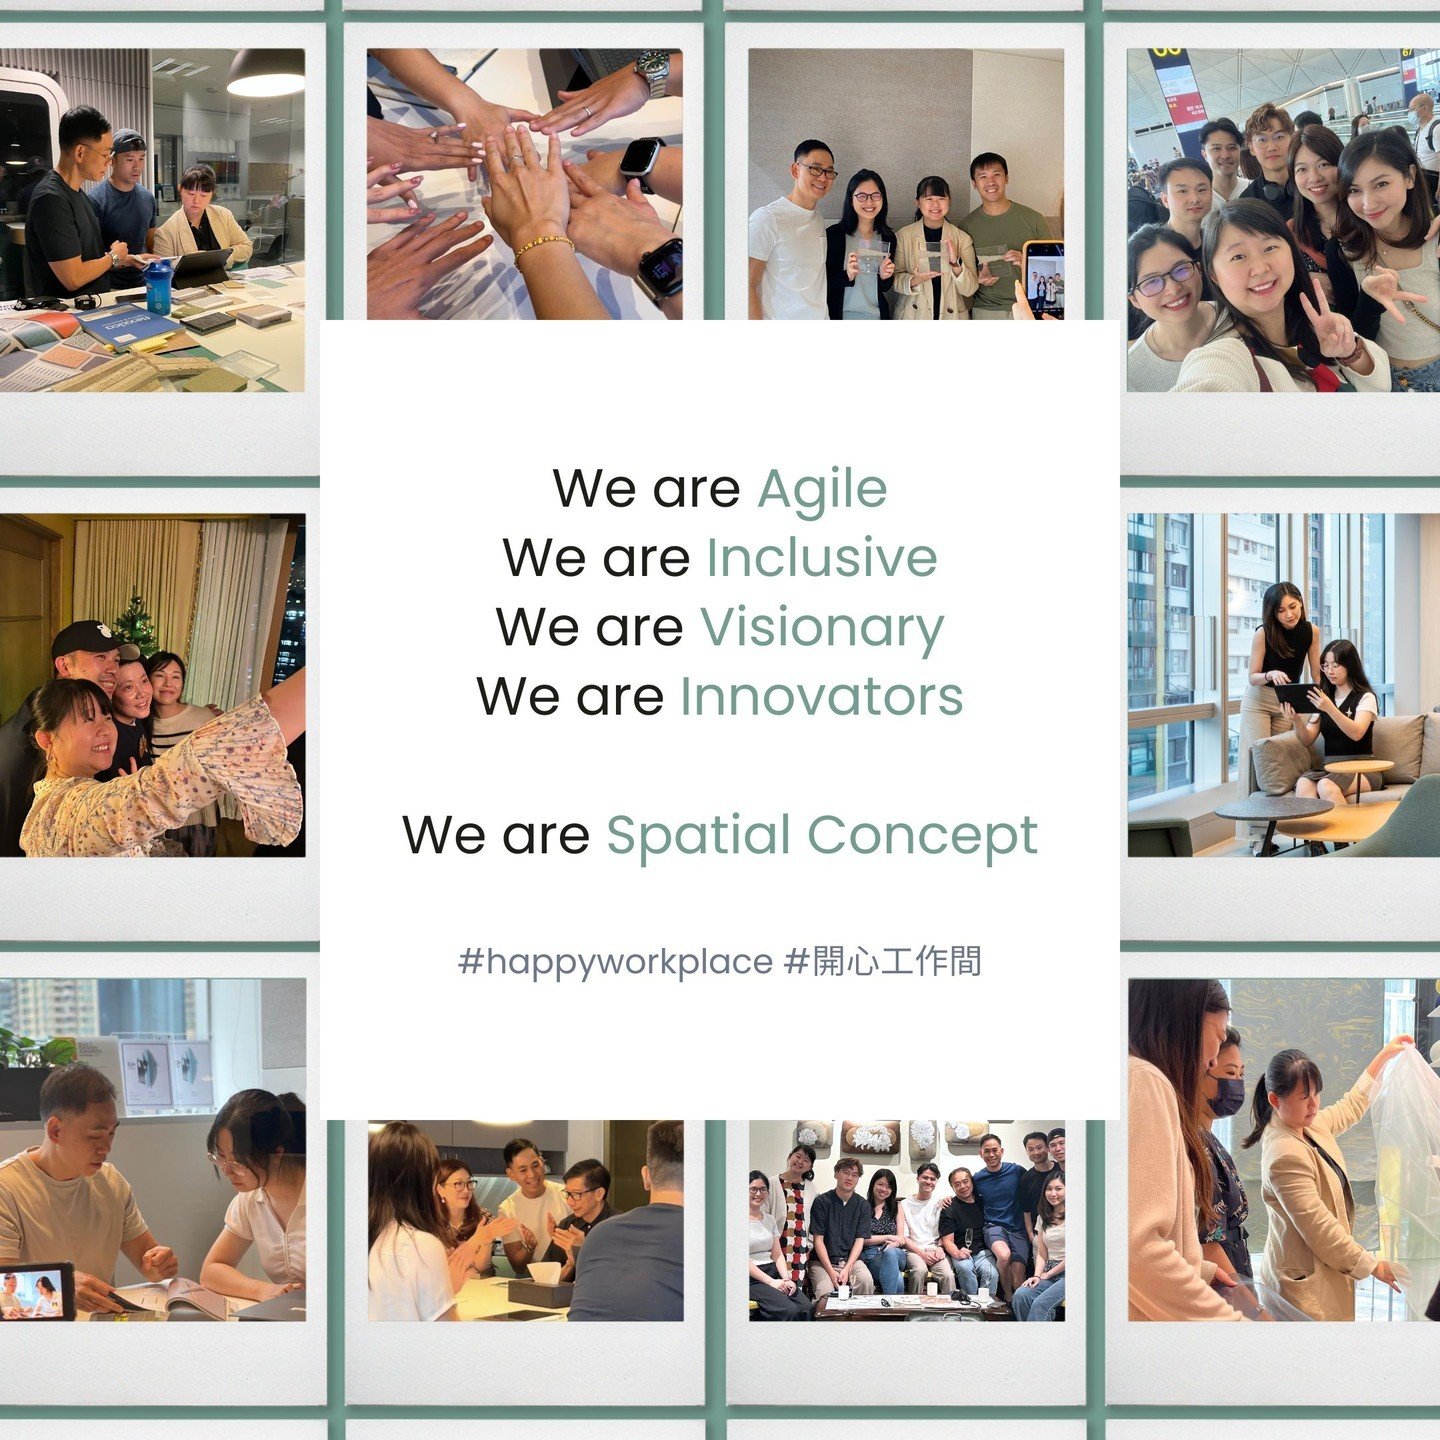 We are Agile. We are Inclusive. We a�re Visionary. We are Innovators. We are Spatial Concept!

#happyworkplace #開心工作間